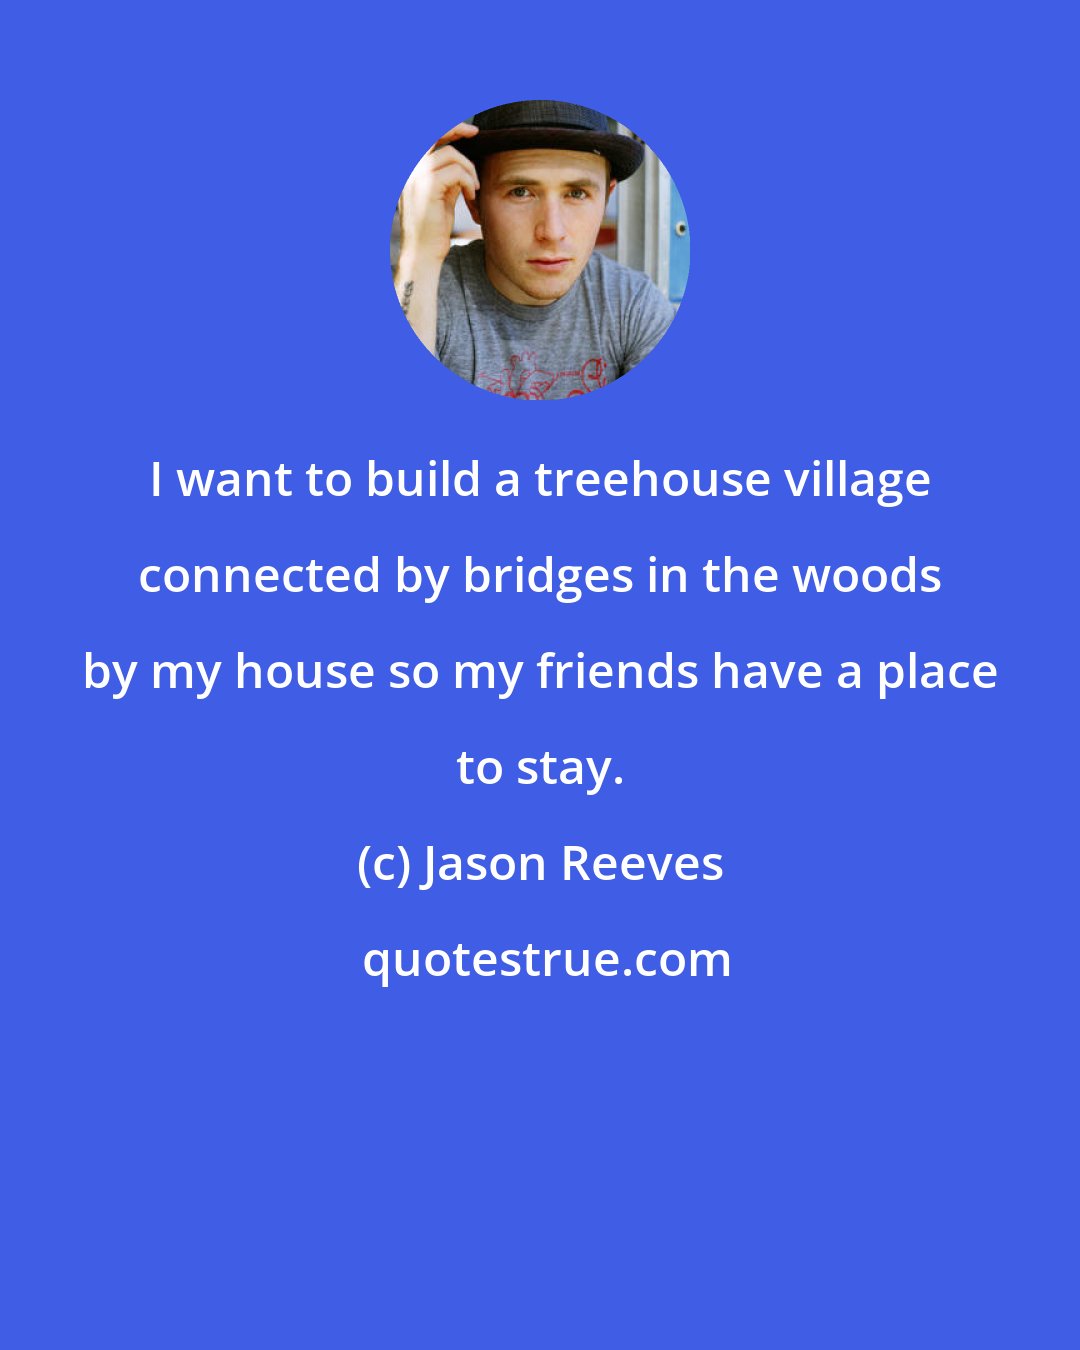 Jason Reeves: I want to build a treehouse village connected by bridges in the woods by my house so my friends have a place to stay.